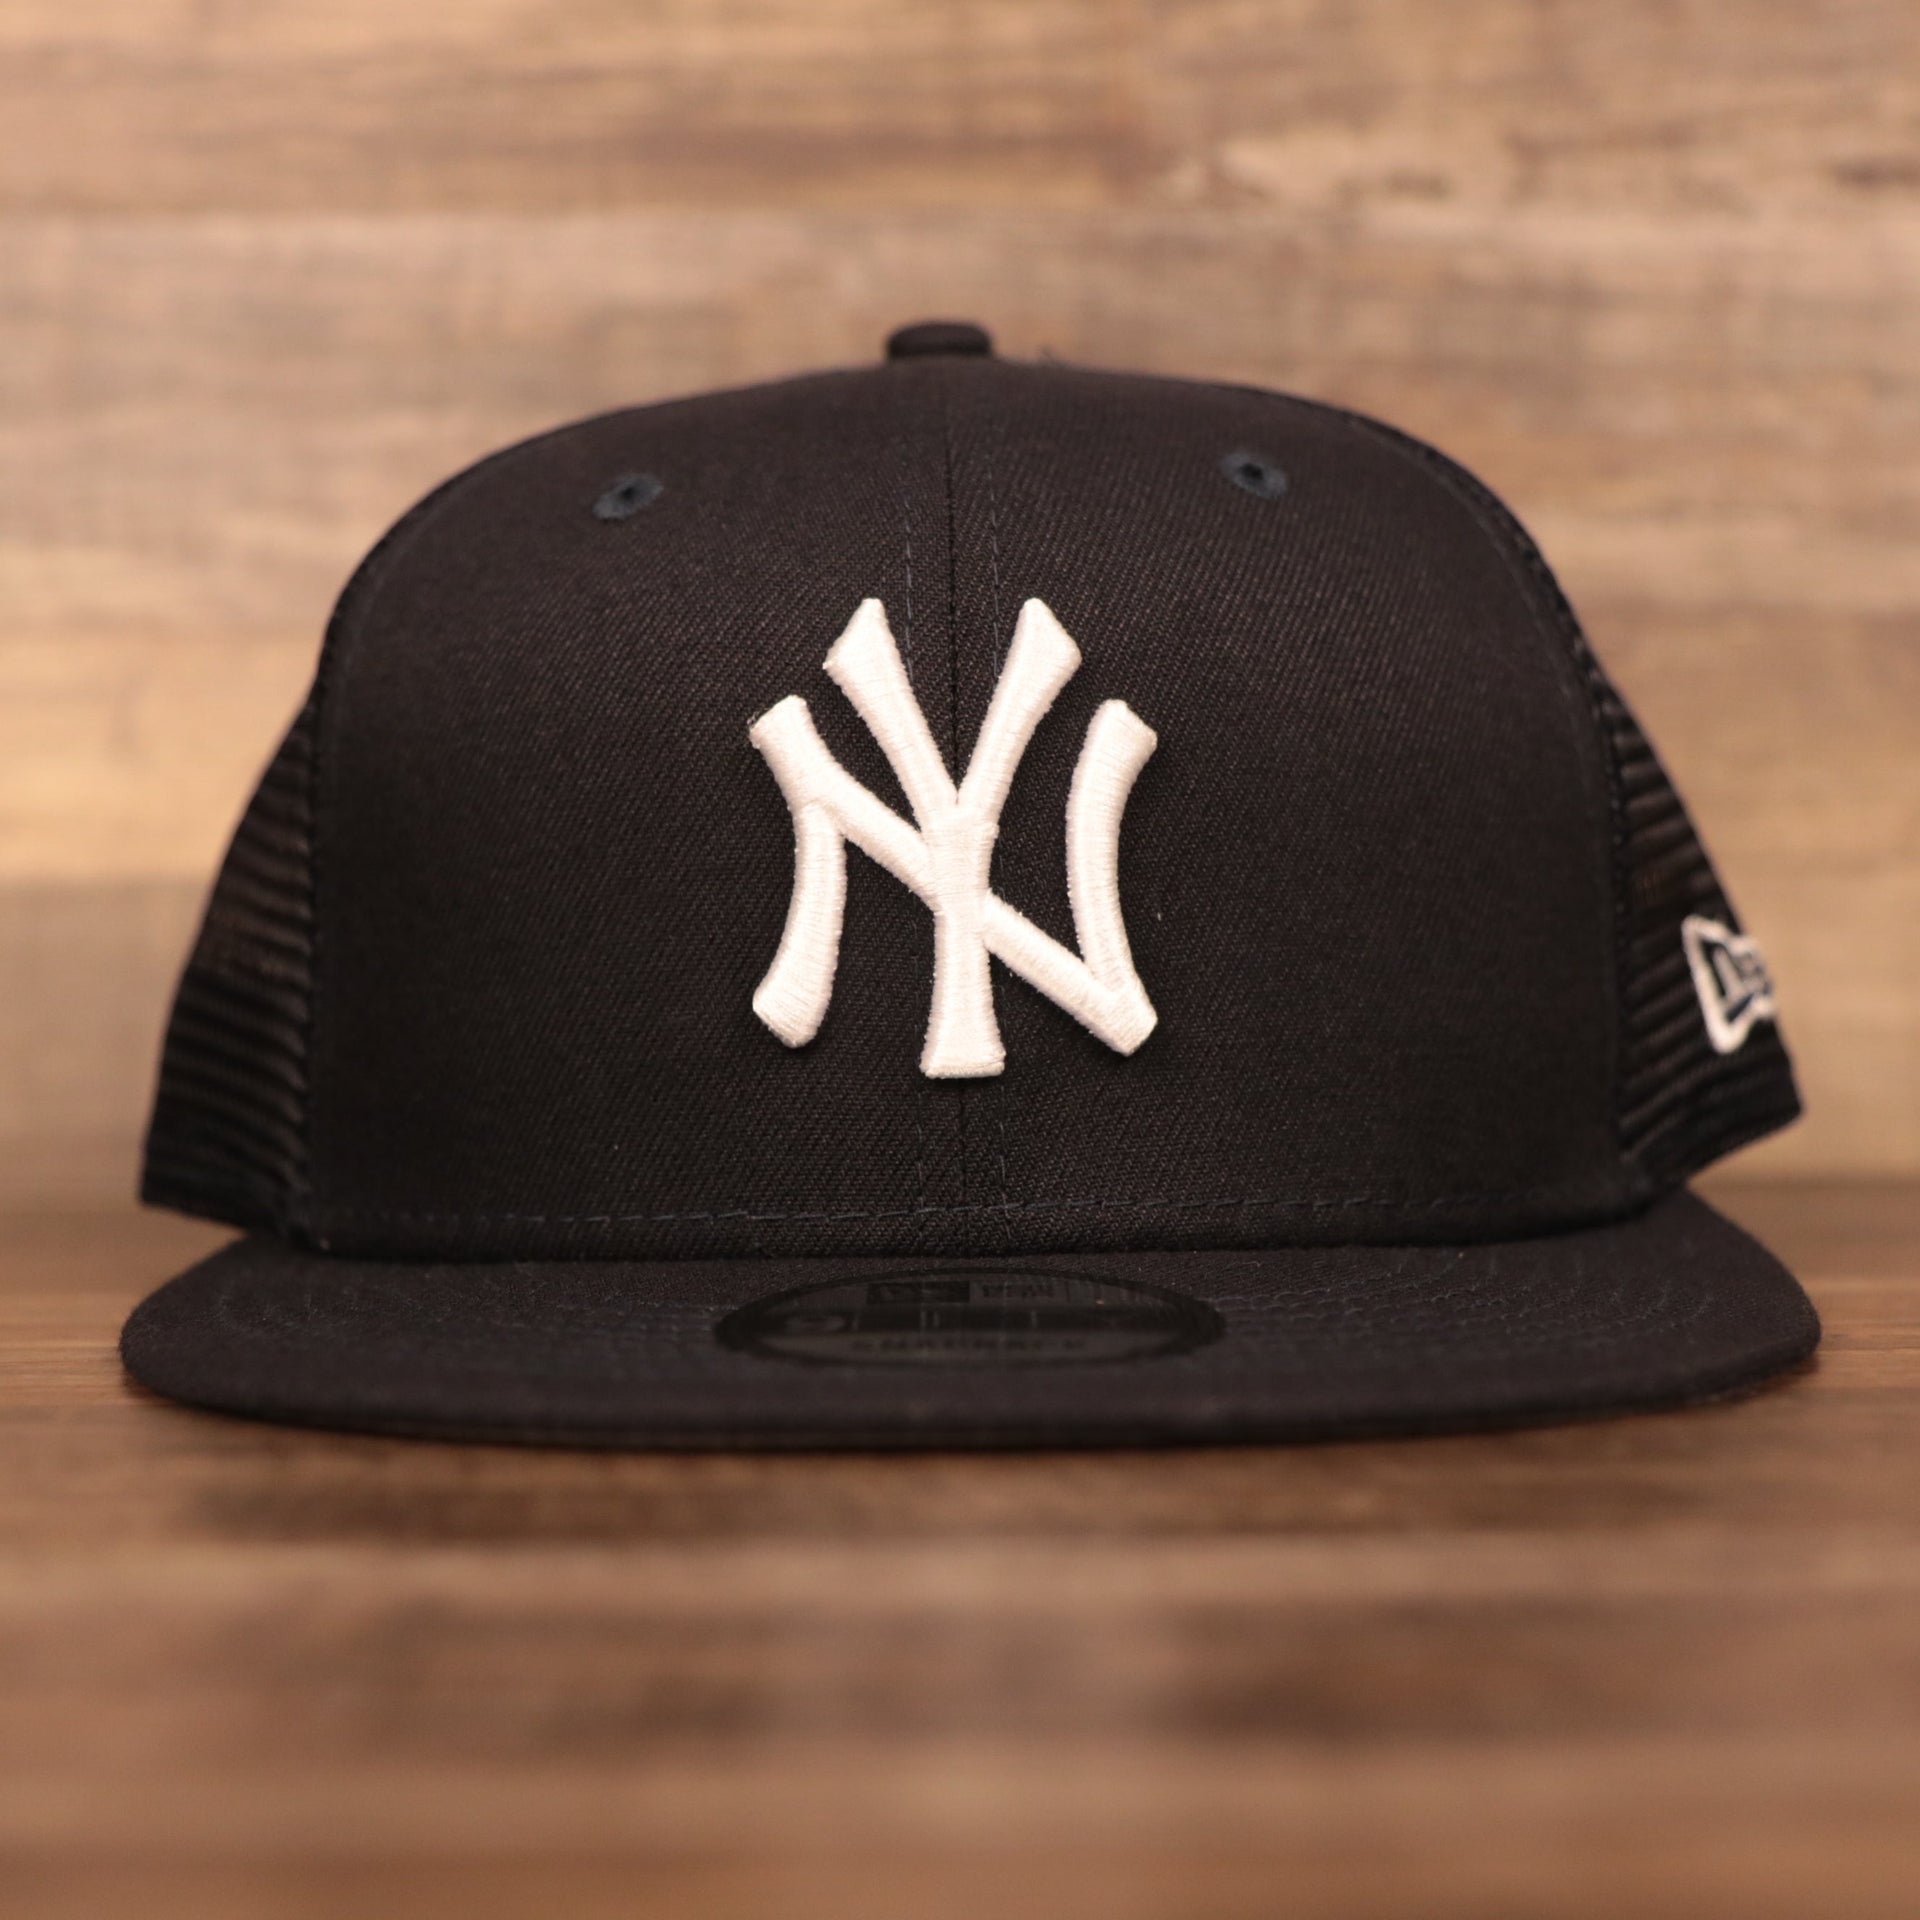 The logo of the New York Yankees on the front side of the navy New Era trucker hat.